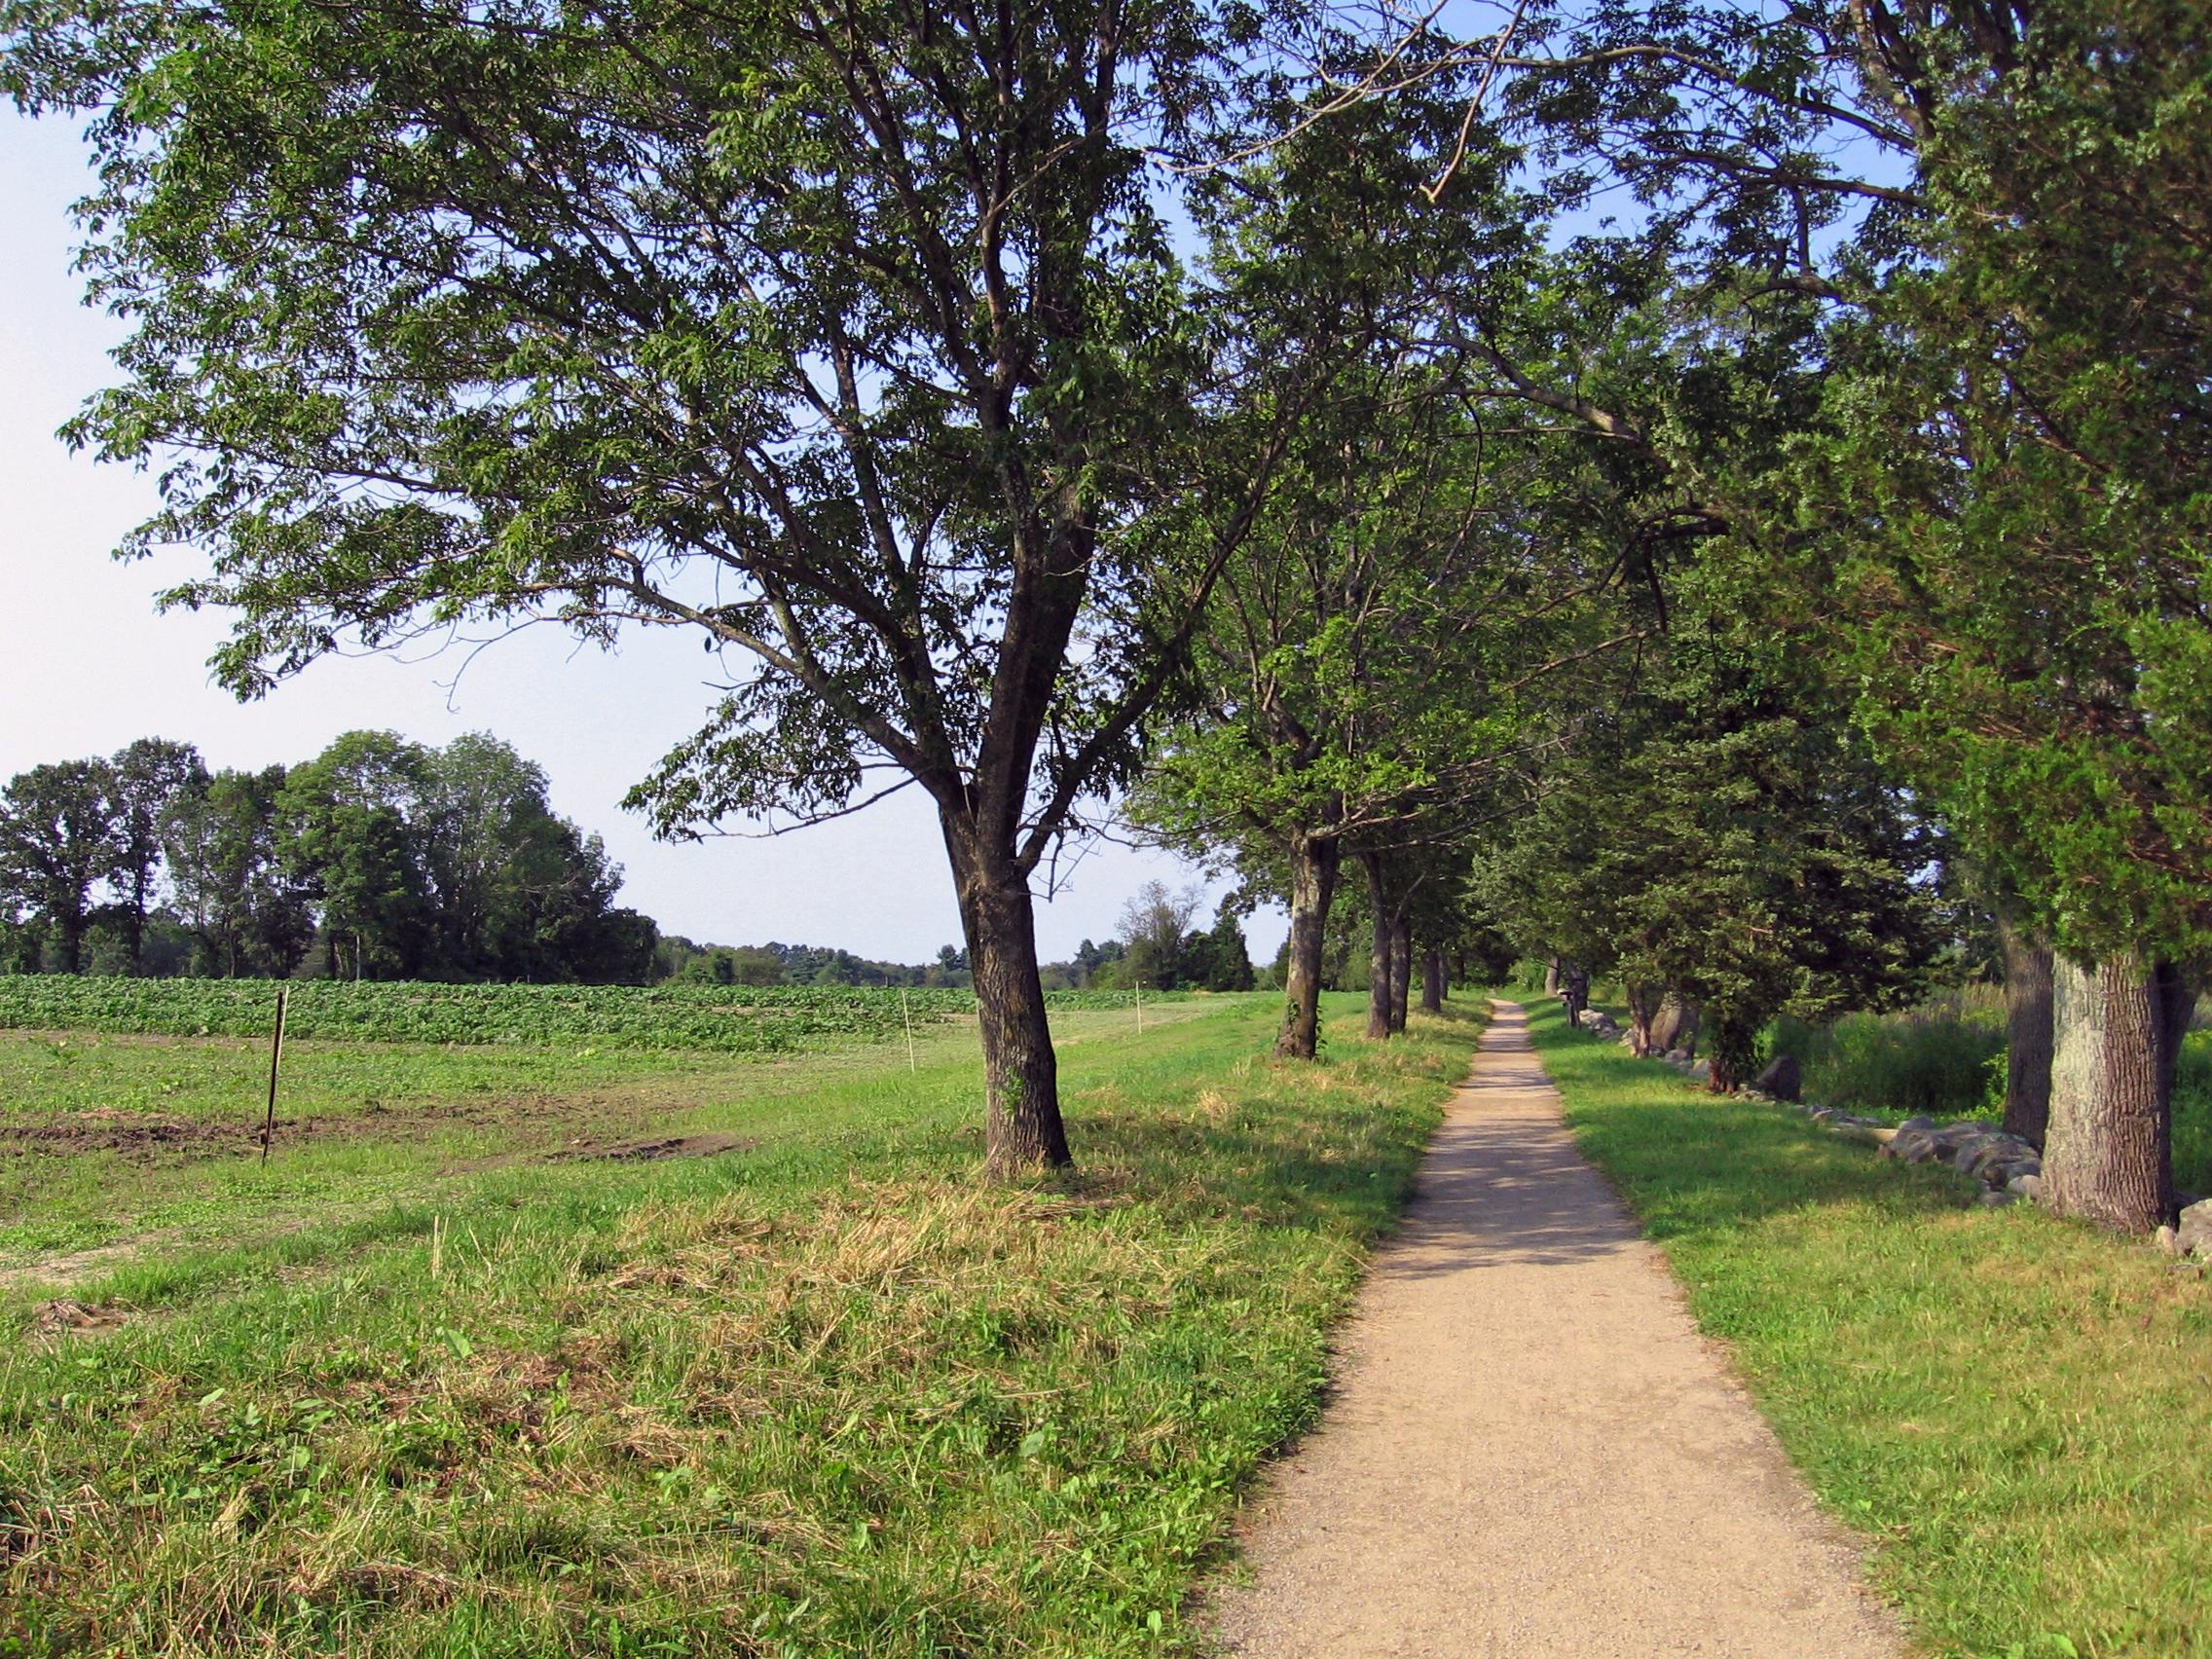 A narrow dirt track runs through green fields shaded by large trees.